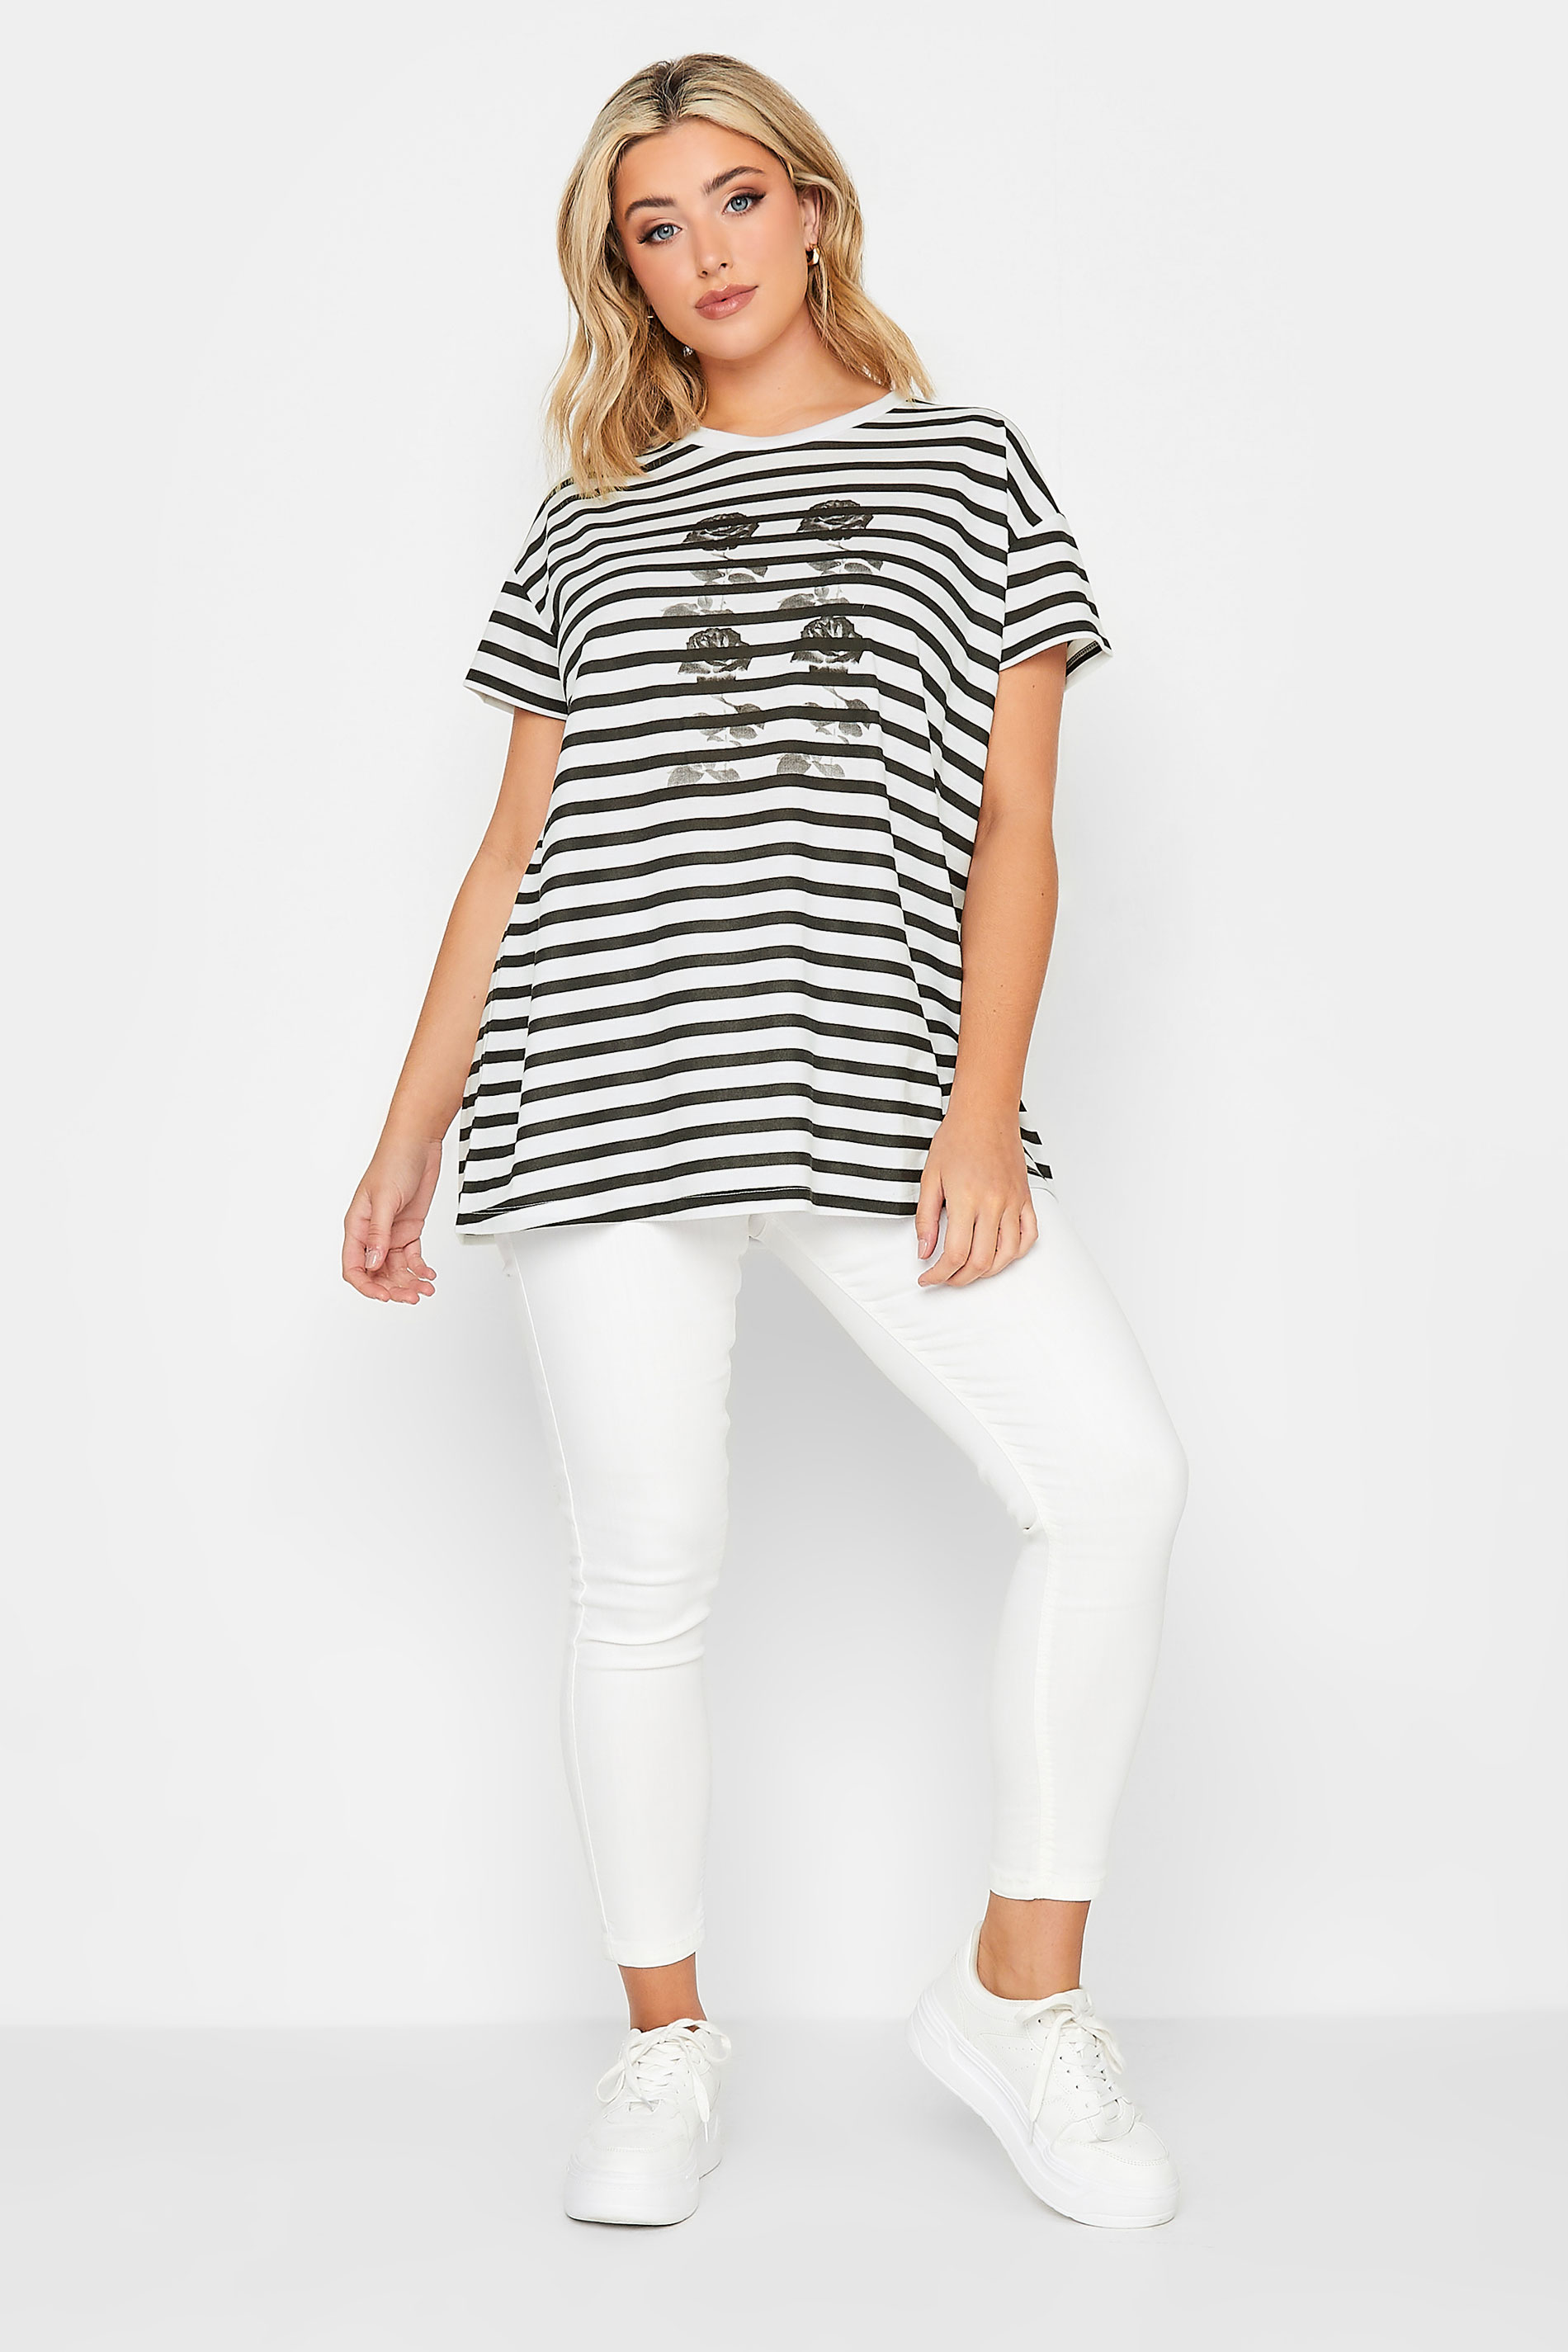 YOURS Plus Size Black Stripe Rose Print T-Shirt | Yours Clothing 2